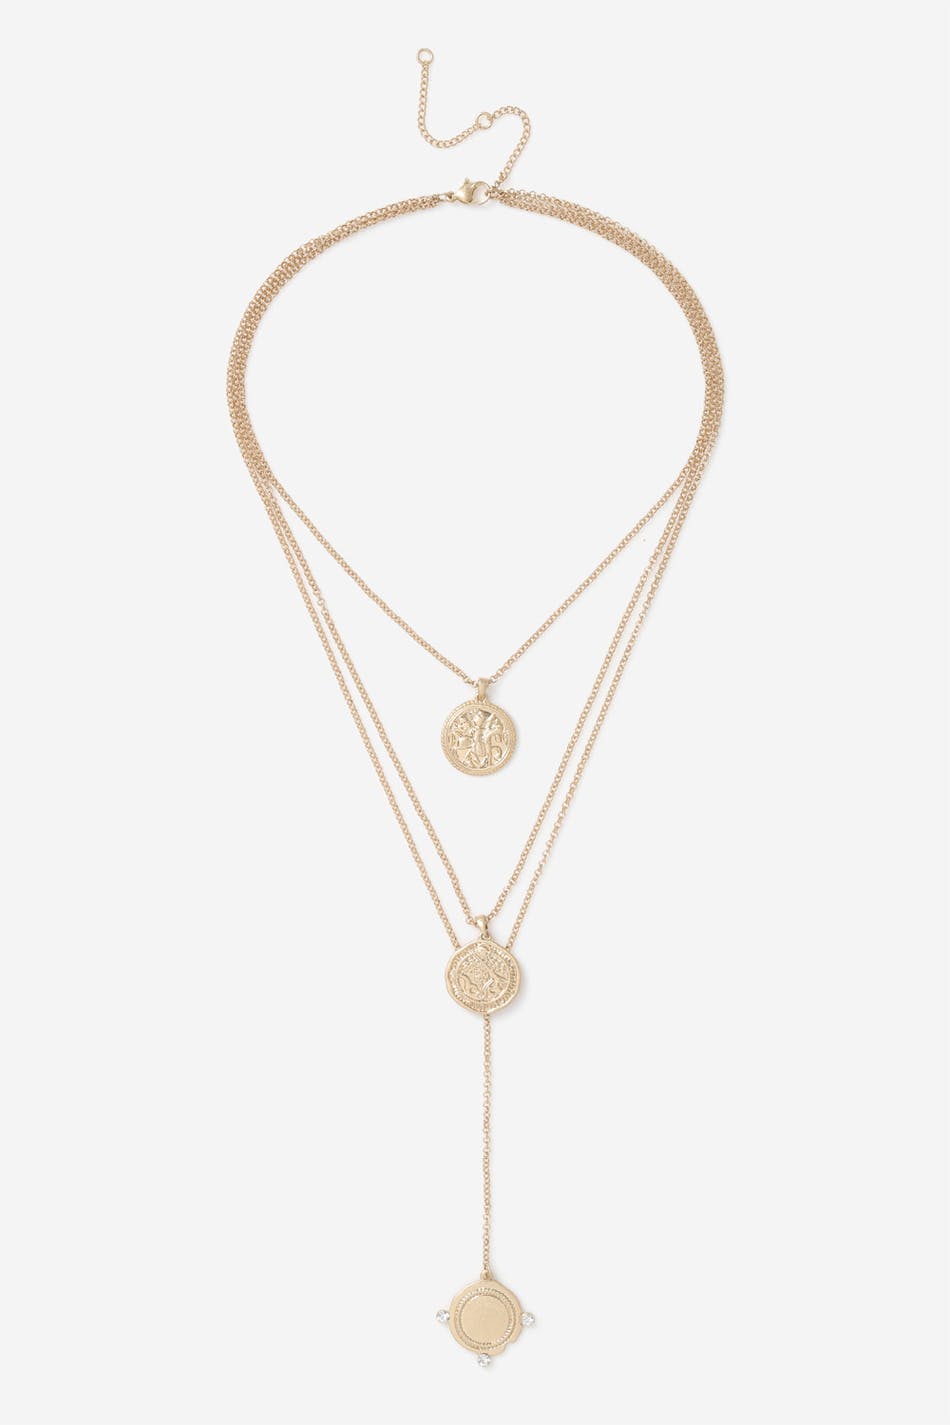 GOLD COIN Y MROW NECKLACE